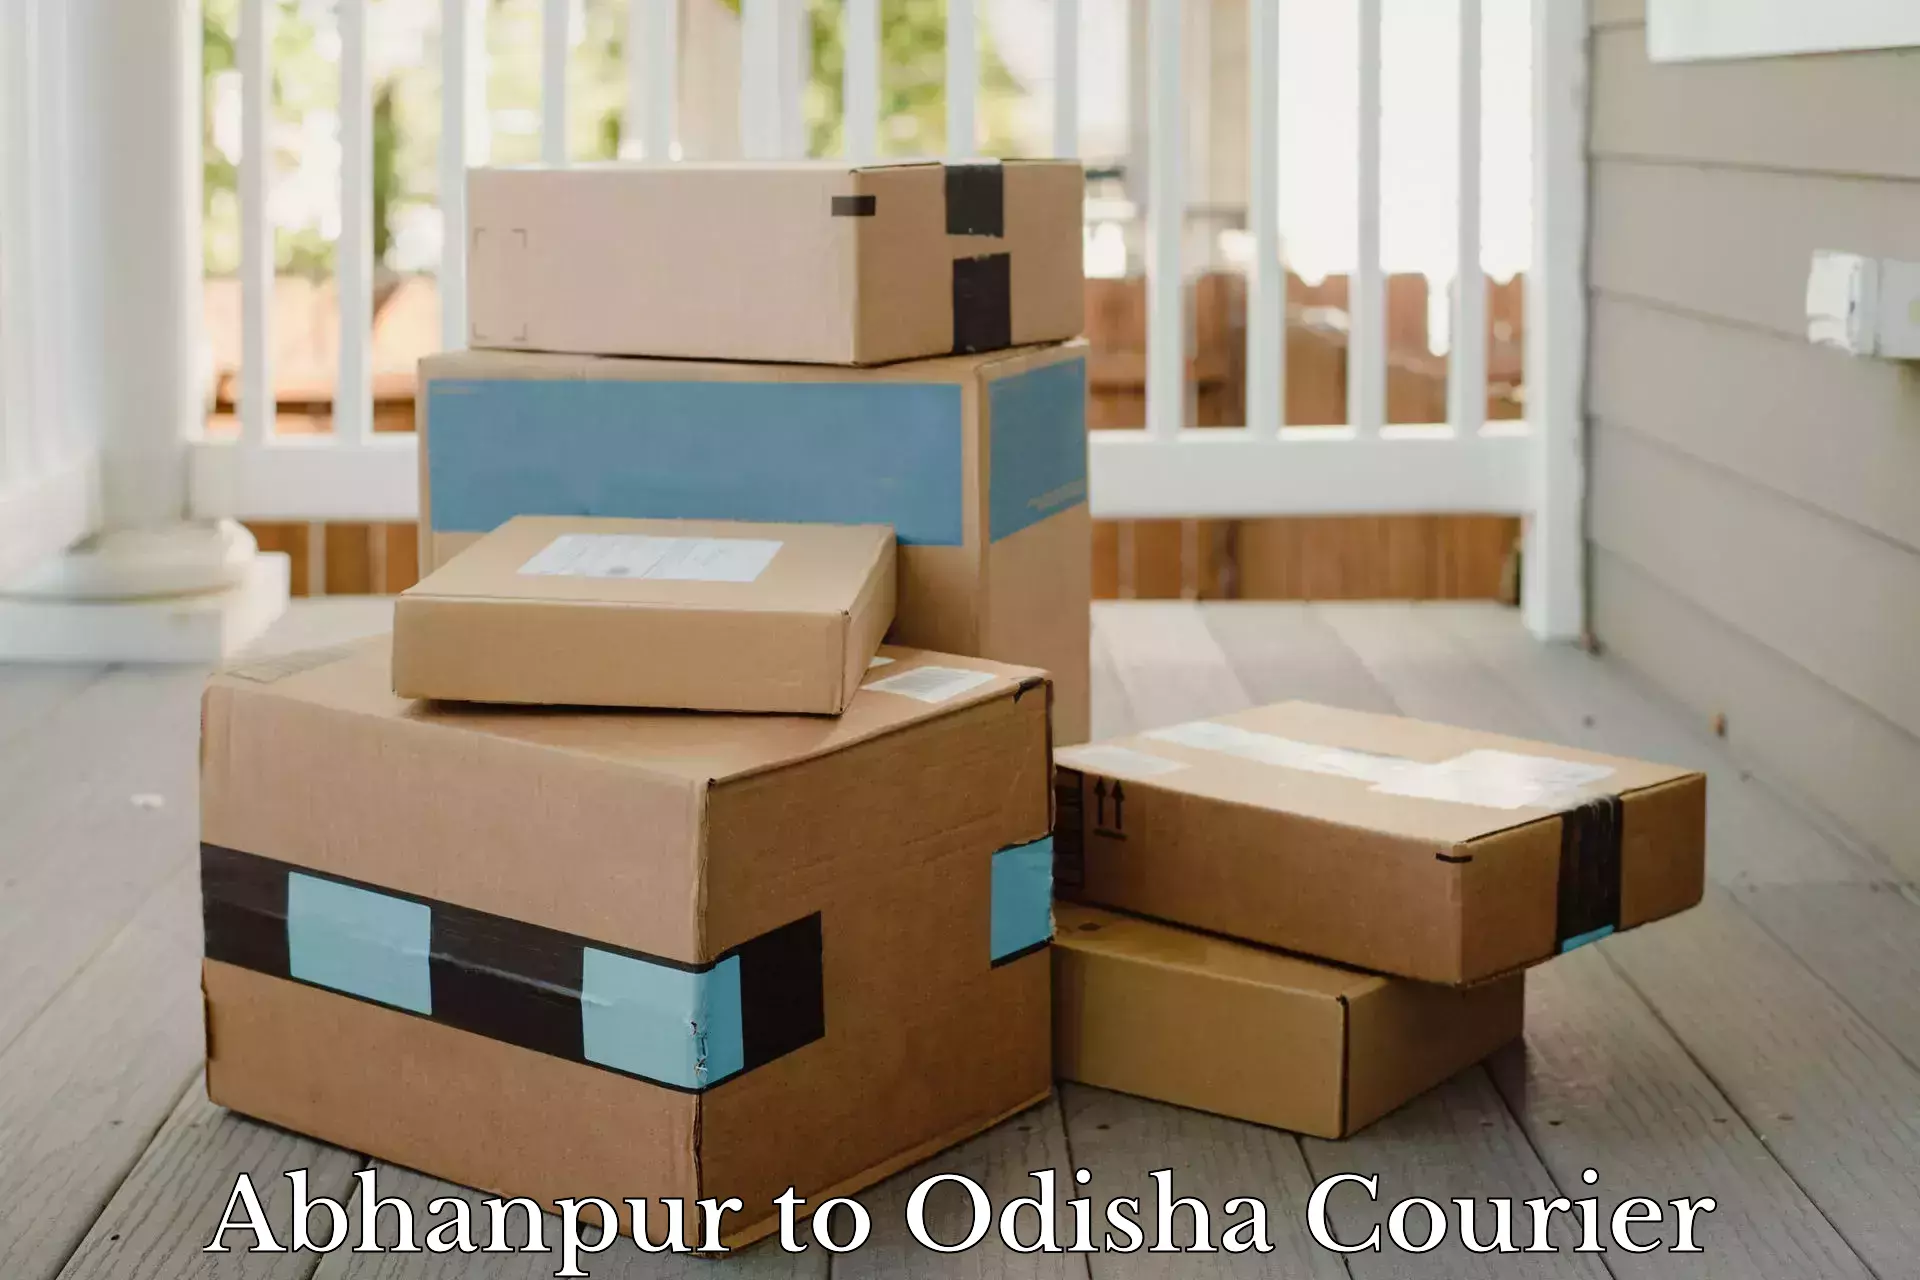 Reliable shipping partners Abhanpur to Baleswar